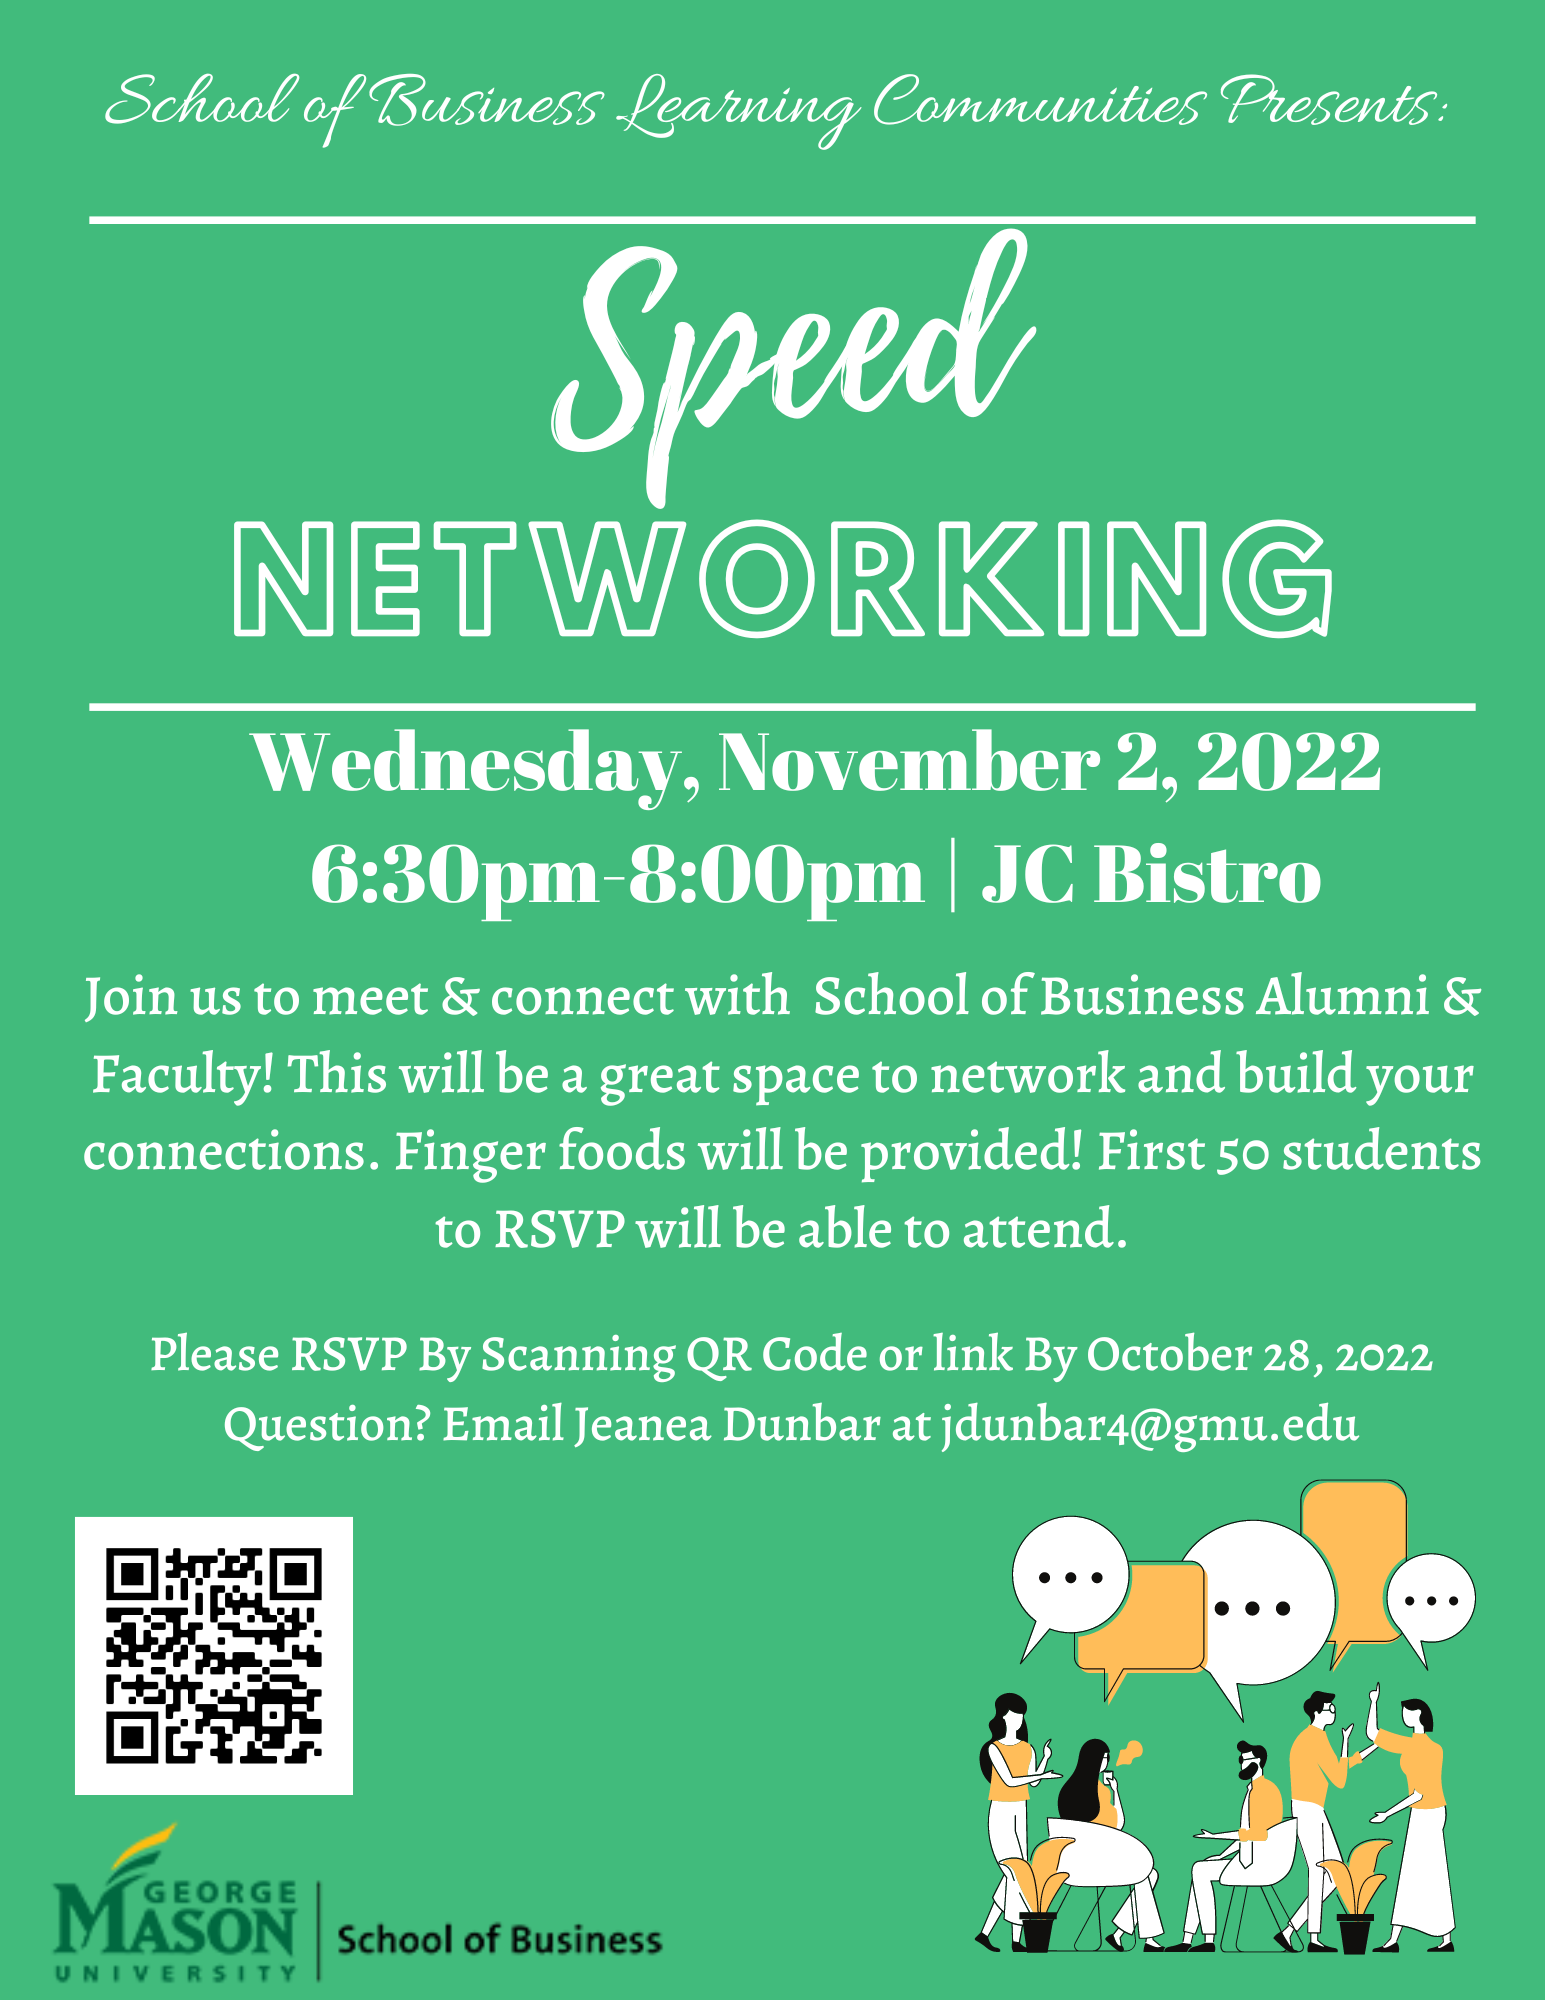 School of Business Speed Networking Event, November 2 from 6:30-8pm in the JC Bistro. Finger foods will be provided. First 50 students to RSVP will be able to attend. All are welcome! 